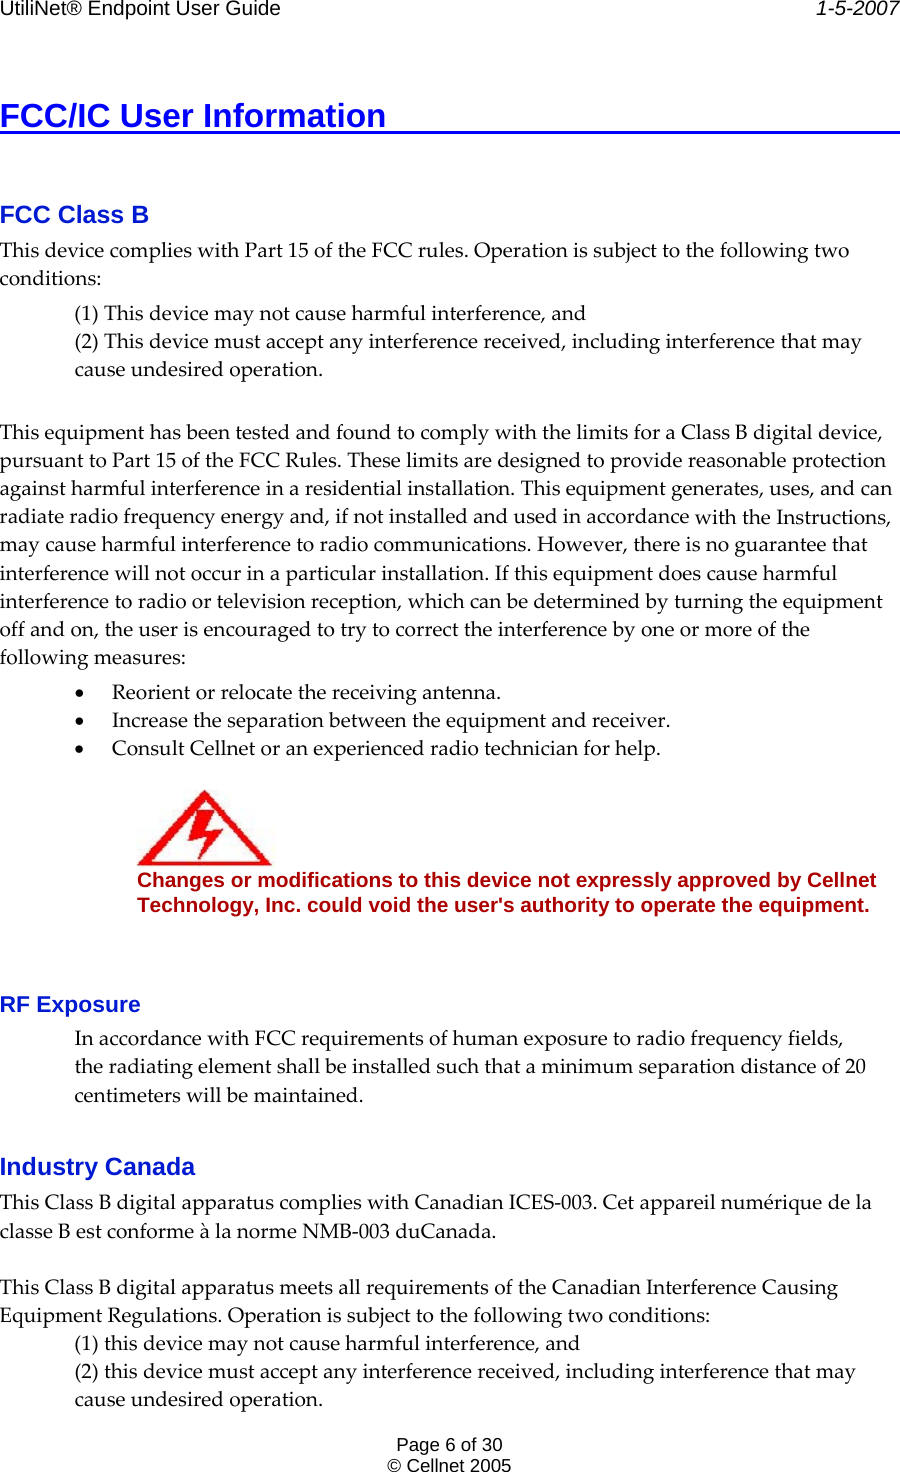 UtiliNet® Endpoint User Guide    1-5-2007 Page 6 of 30 © Cellnet 2005  FCC/IC User Information          FCC Class B  ThisdevicecomplieswithPart15oftheFCCrules.Operationissubjecttothefollowingtwoconditions:(1)Thisdevicemaynotcauseharmfulinterference,and(2)Thisdevicemustacceptanyinterferencereceived,includinginterferencethatmaycauseundesiredoperation.ThisequipmenthasbeentestedandfoundtocomplywiththelimitsforaClassBdigitaldevice,pursuanttoPart15oftheFCCRules.Theselimitsaredesignedtoprovidereasonableprotectionagainstharmfulinterferenceinaresidentialinstallation.Thisequipmentgenerates,uses,andcanradiateradiofrequencyenergyand,ifnotinstalledandusedinaccordancewiththeInstructions,maycauseharmfulinterferencetoradiocommunications.However,thereisnoguaranteethatinterferencewillnotoccurinaparticularinstallation.Ifthisequipmentdoescauseharmfulinterferencetoradioortelevisionreception,whichcanbedeterminedbyturningtheequipmentoffandon,theuserisencouragedtotrytocorrecttheinterferencebyoneormoreofthefollowingmeasures:• Reorientorrelocatethereceivingantenna.• Increasetheseparationbetweentheequipmentandreceiver.• ConsultCellnetoranexperiencedradiotechnicianforhelp.Changes or modifications to this device not expressly approved by Cellnet  Technology, Inc. could void the user&apos;s authority to operate the equipment.  RF Exposure  InaccordancewithFCCrequirementsofhumanexposuretoradiofrequencyfields,theradiatingelementshallbeinstalledsuchthataminimumseparationdistanceof20centimeterswillbemaintained. Industry Canada  ThisClassBdigitalapparatuscomplieswithCanadianICES‐003.CetappareilnumériquedelaclasseBestconformeàlanormeNMB‐003duCanada.ThisClassBdigitalapparatusmeetsallrequirementsoftheCanadianInterferenceCausingEquipmentRegulations.Operationissubjecttothefollowingtwoconditions:(1)thisdevicemaynotcauseharmfulinterference,and(2)thisdevicemustacceptanyinterferencereceived,includinginterferencethatmaycauseundesiredoperation.